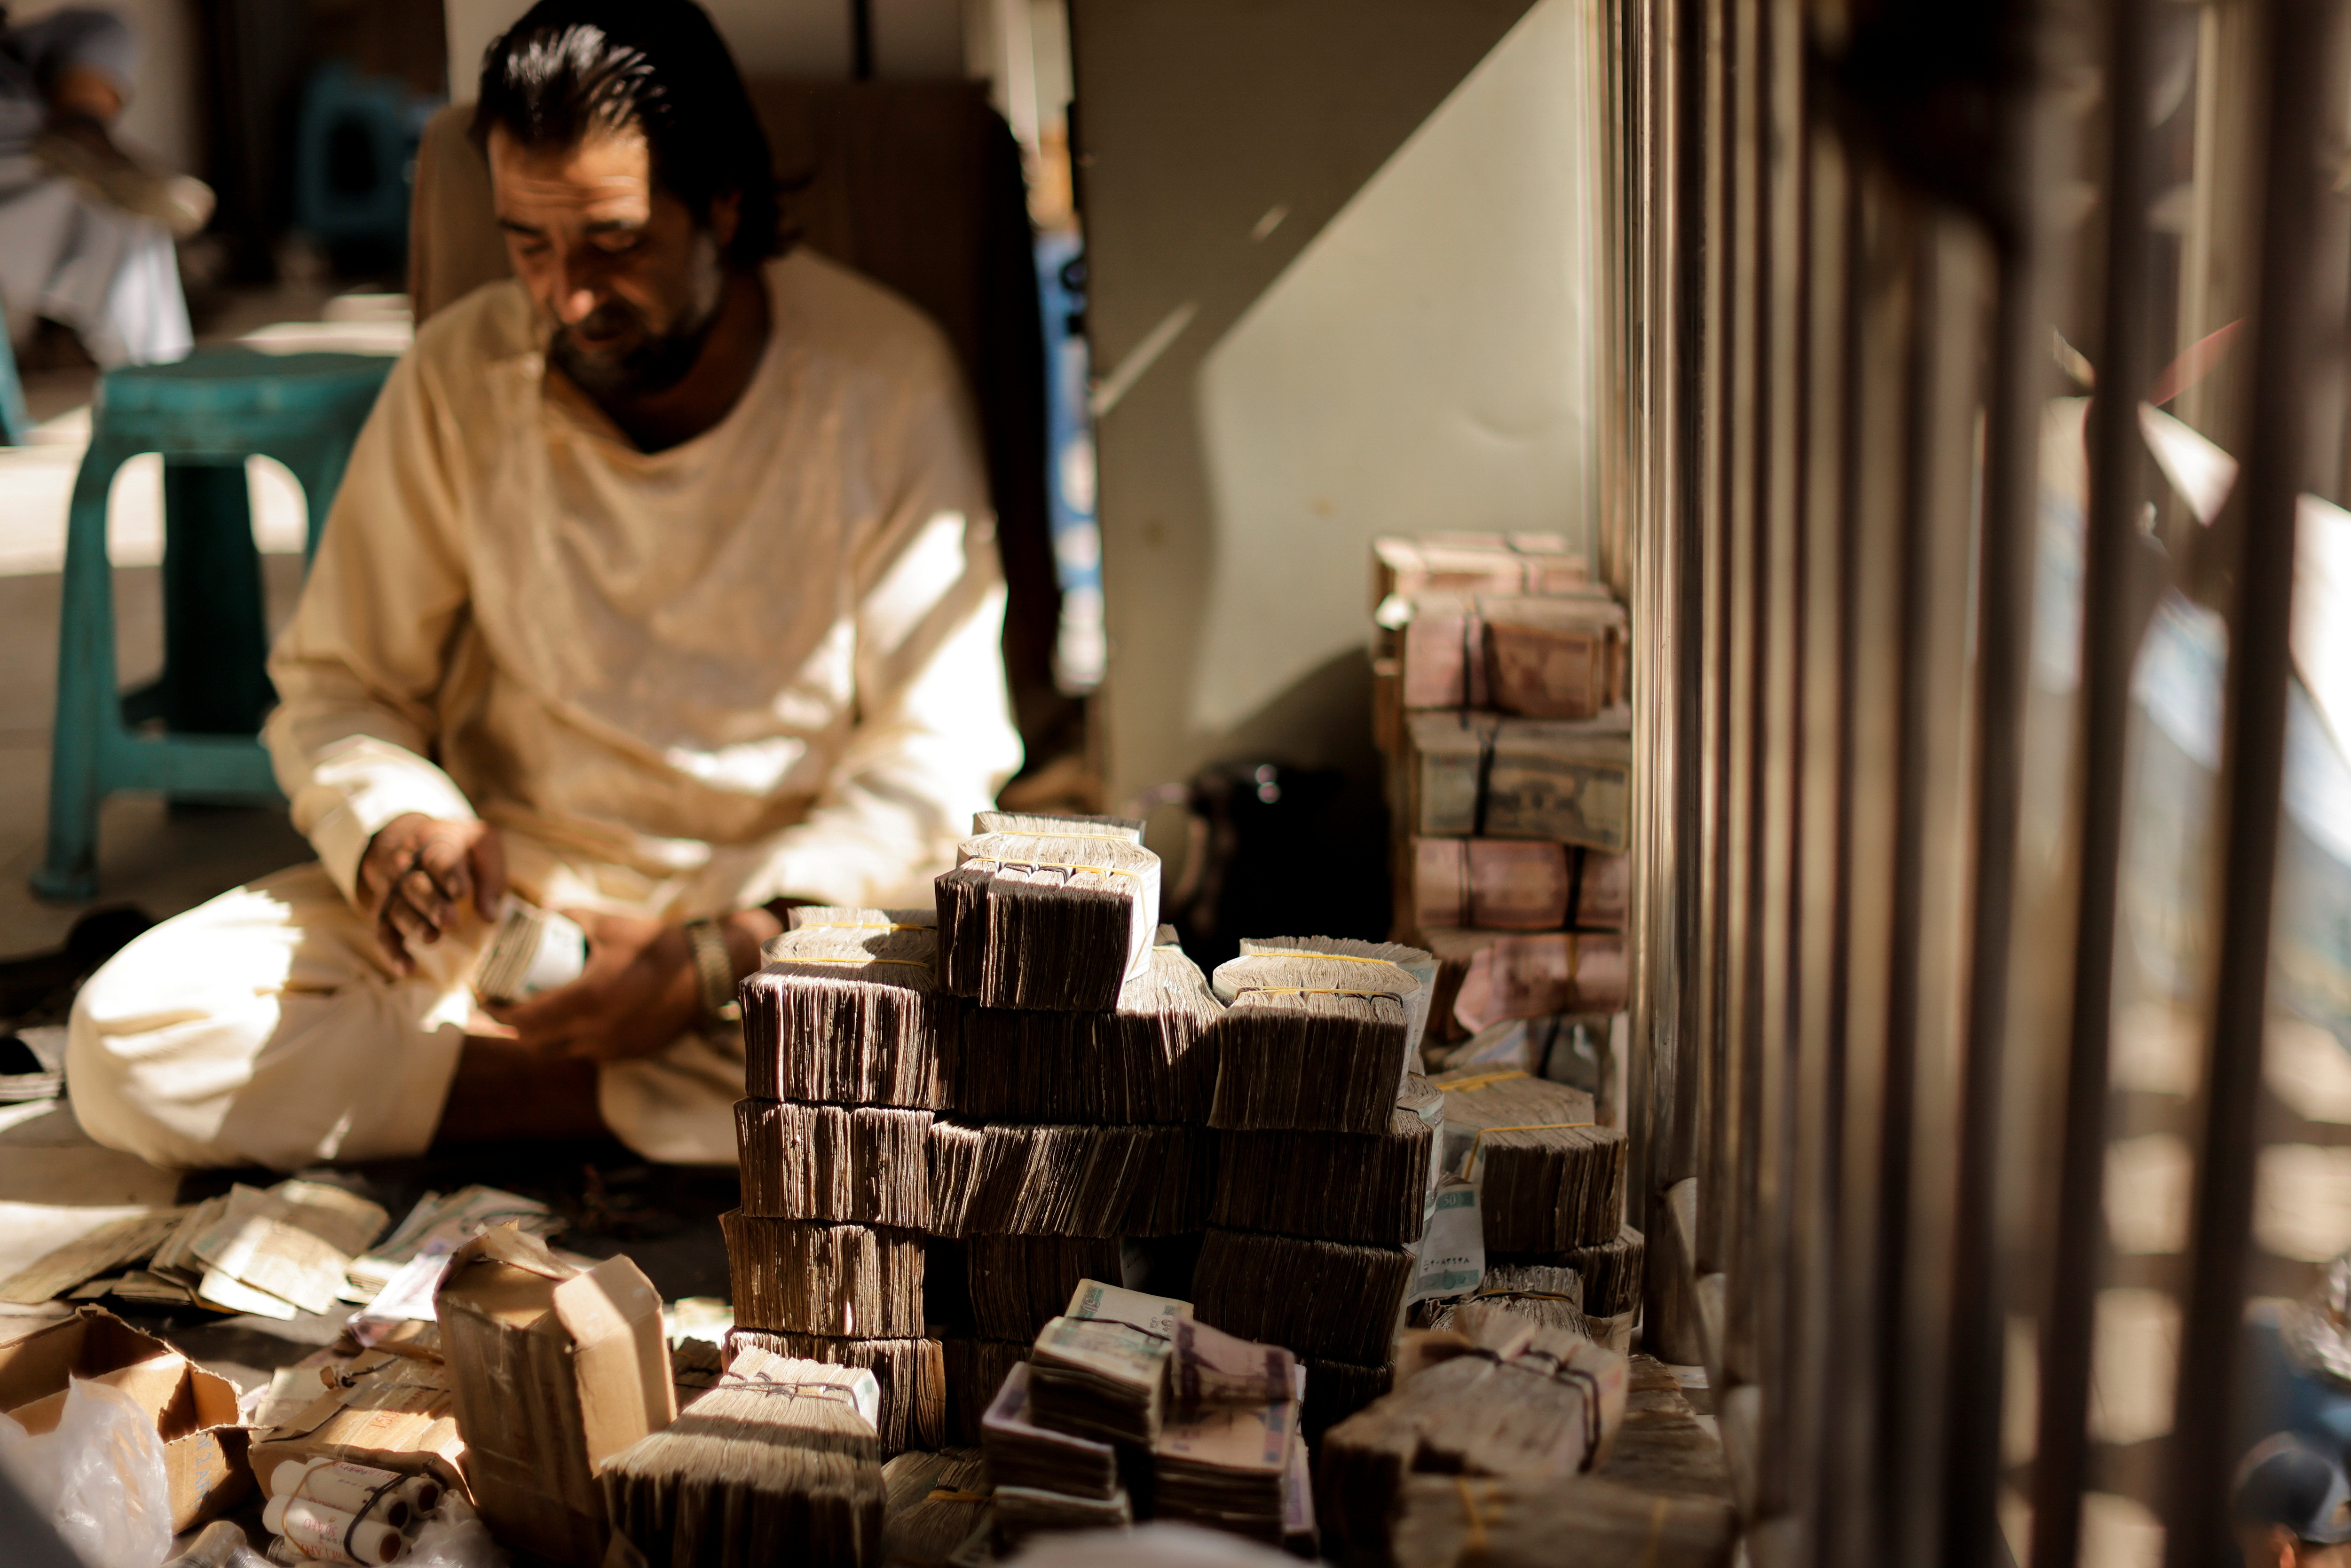 Afghan currency exchange worker stacks banknotes at a market in Kabul